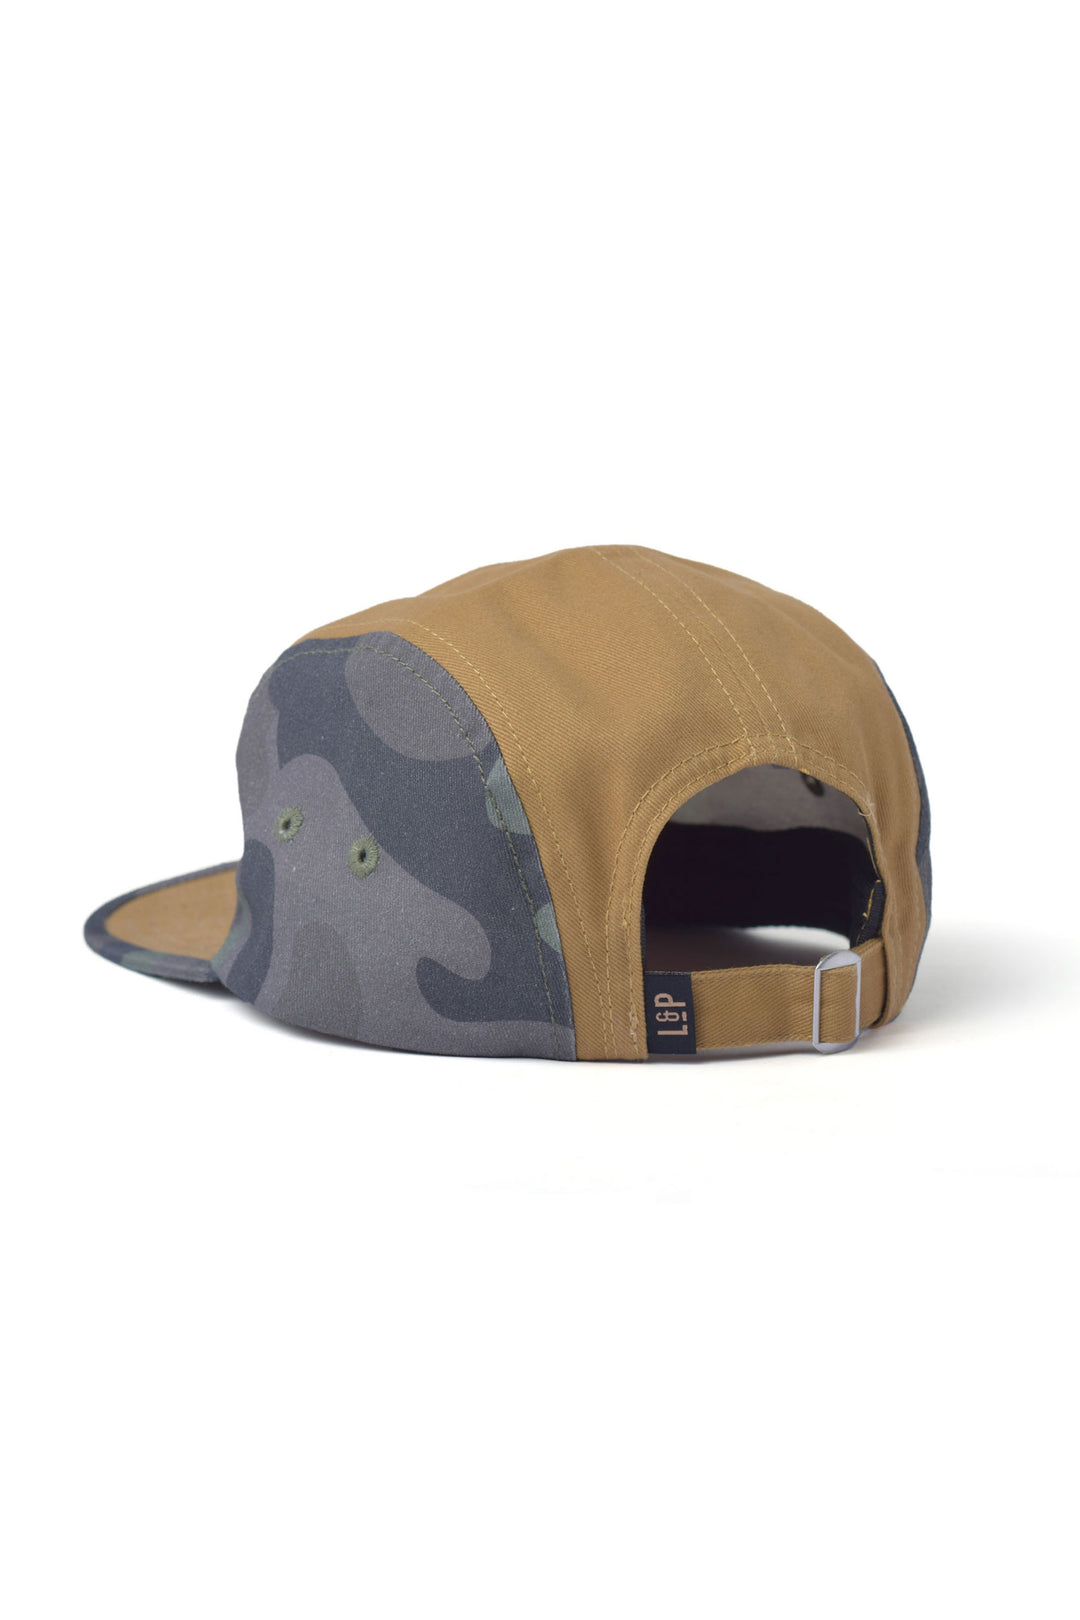 Casquette Woods series - Fit Yin Yang